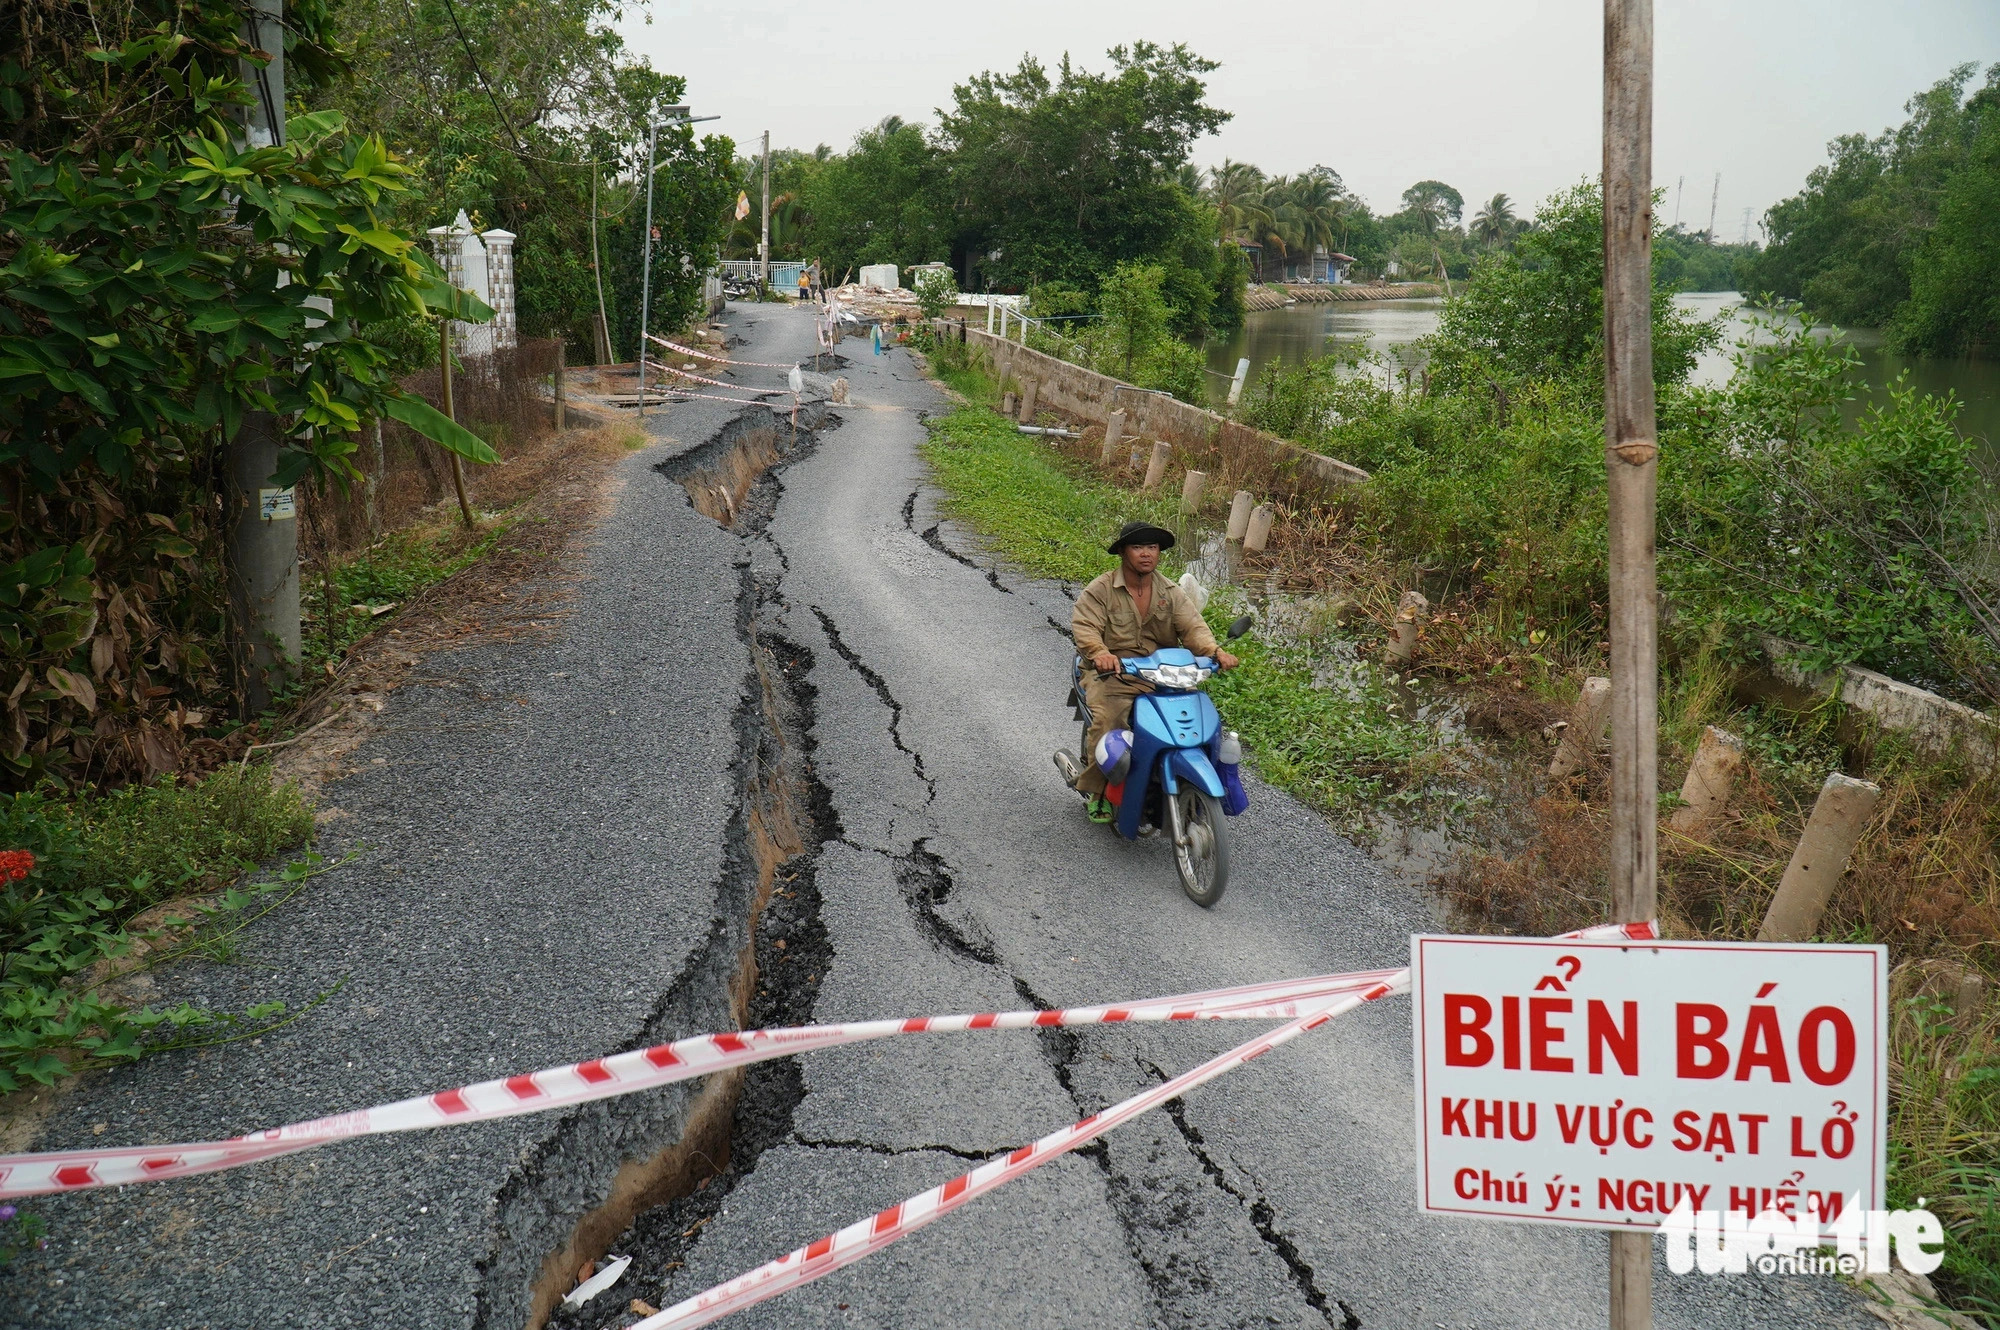 The subsidence is worse at a riverside section of the route. Photo: Mau Truong / Tuoi Tre